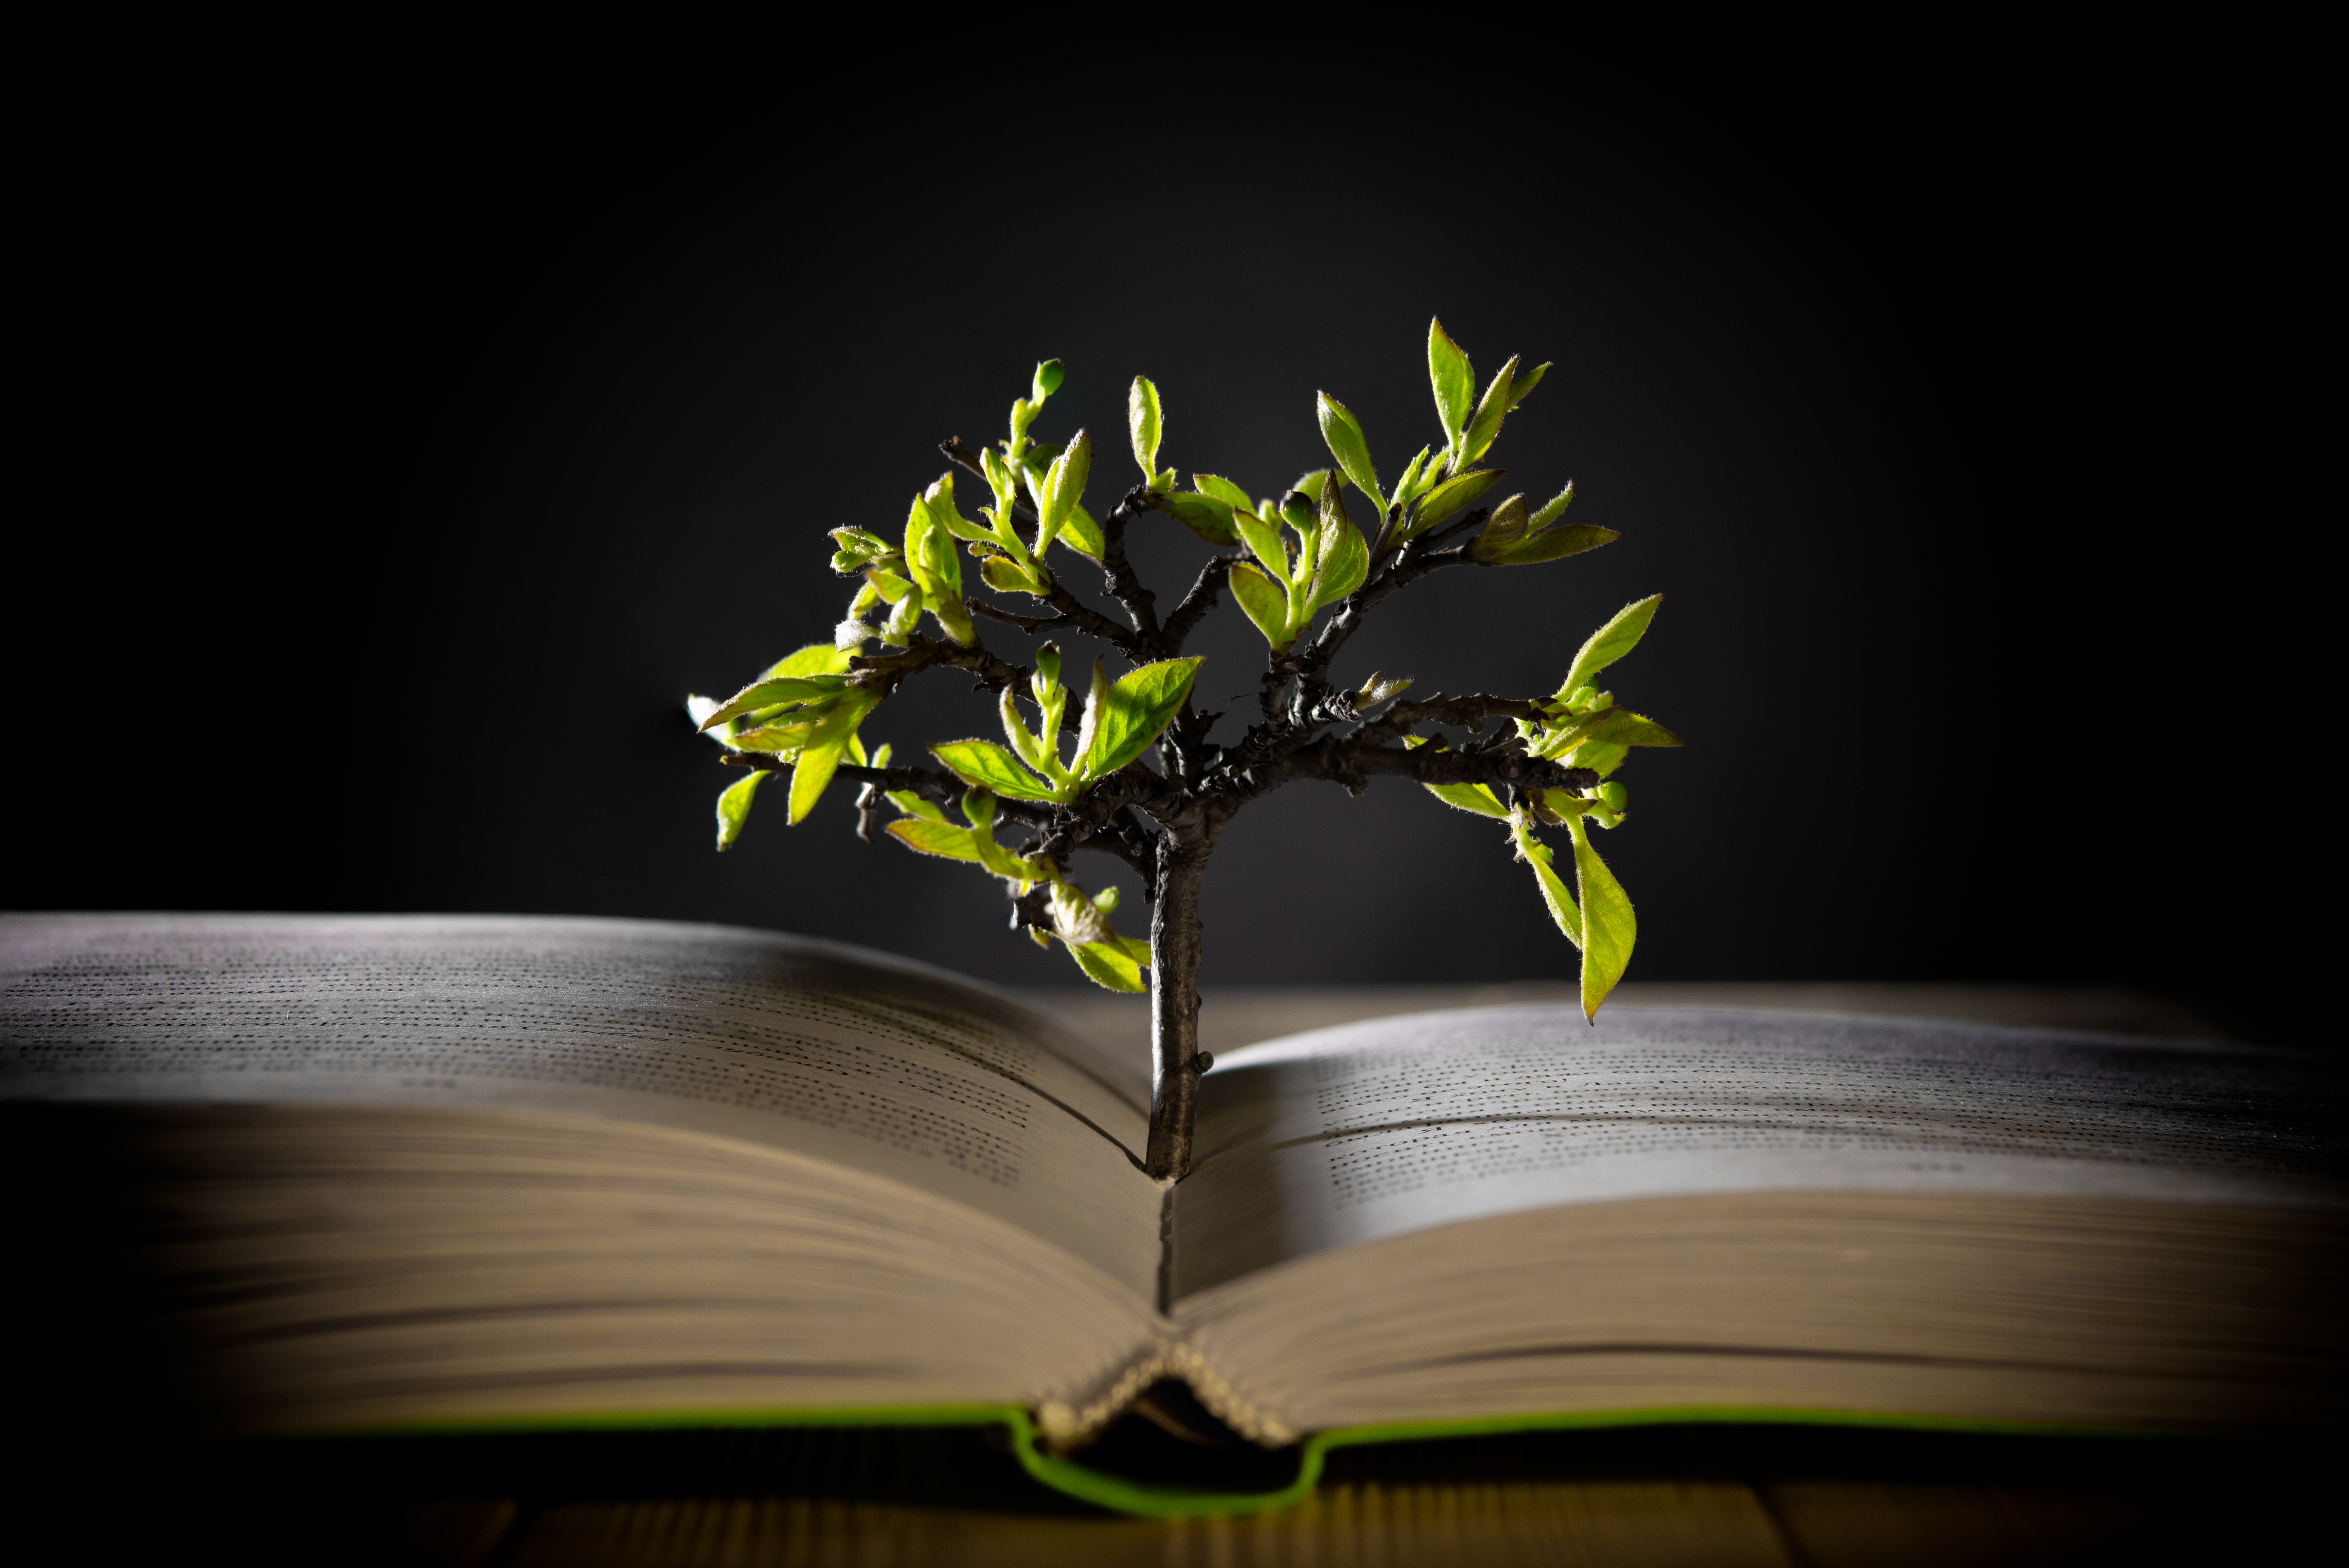 A small tree-like figure grows from the middle of a printed book